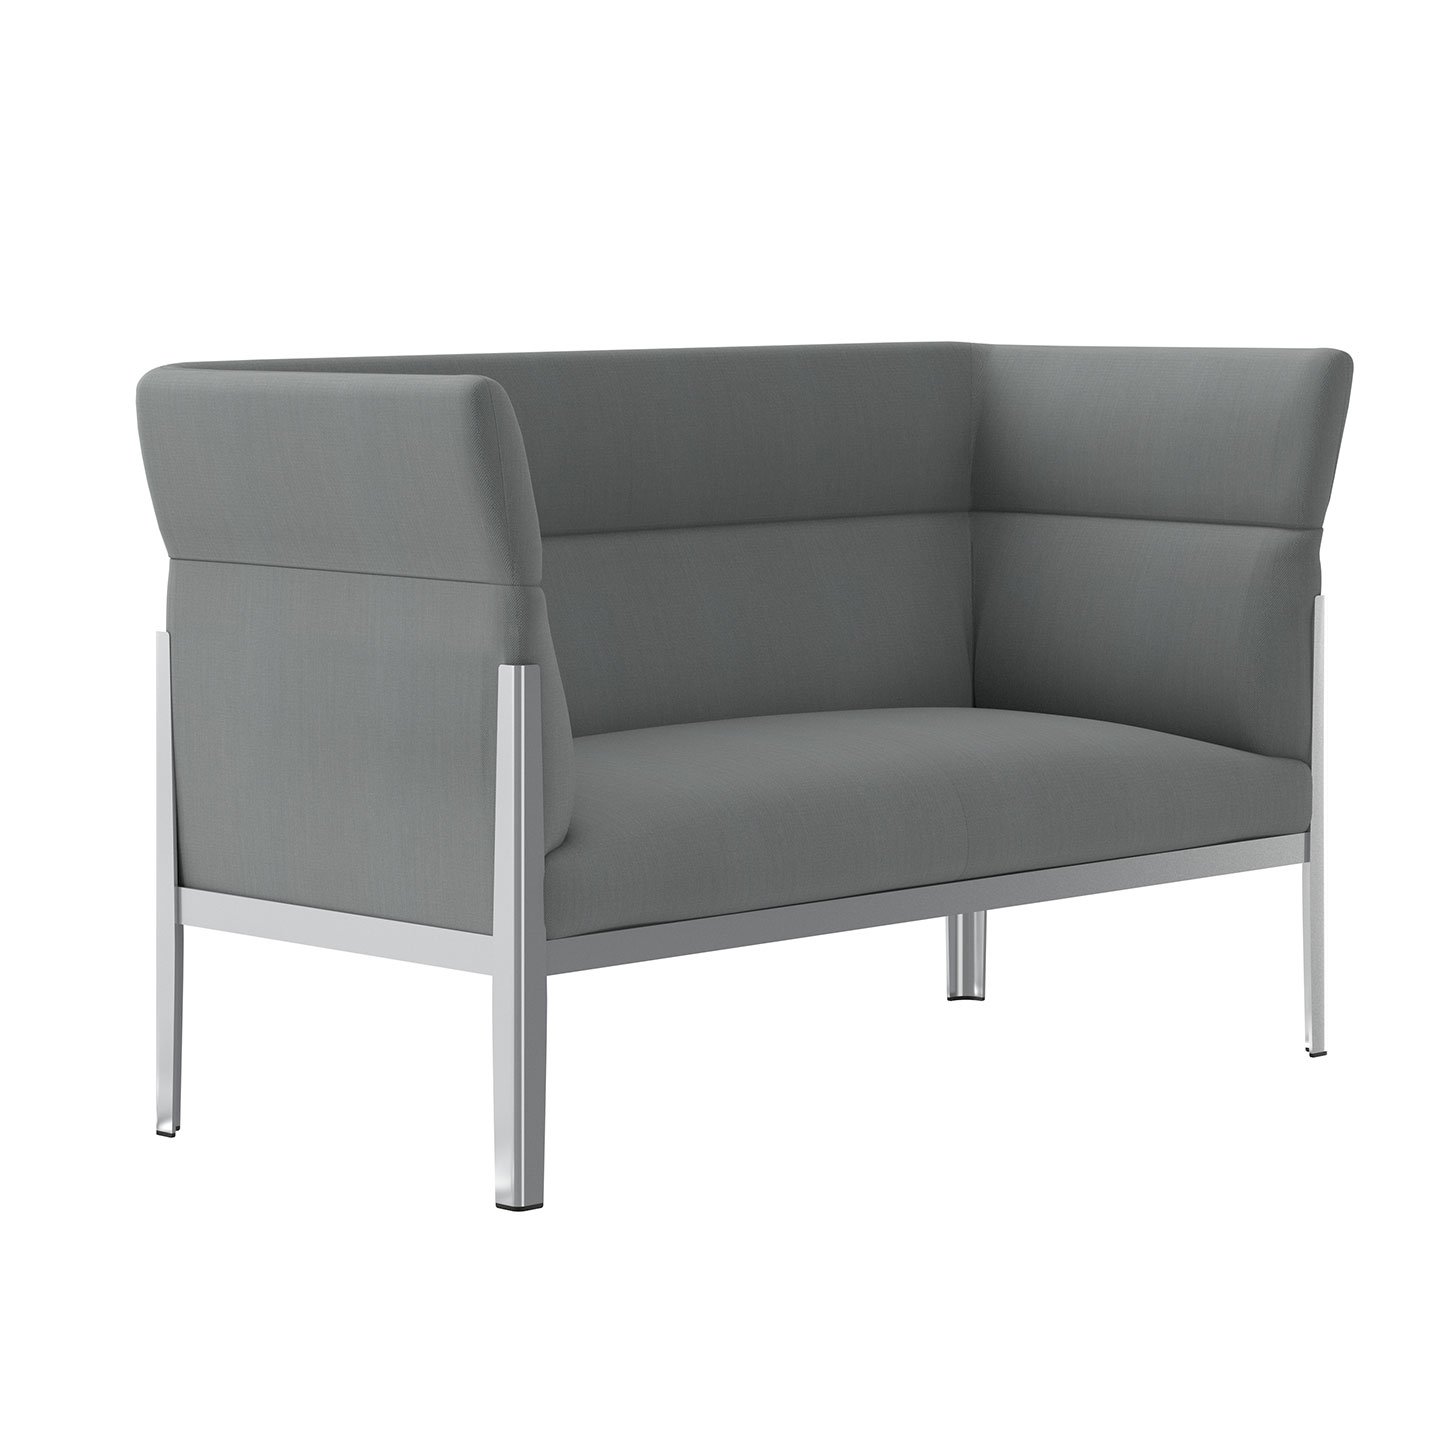 Haworth Cotone Slim lounge in grey color with metal legs in a side view